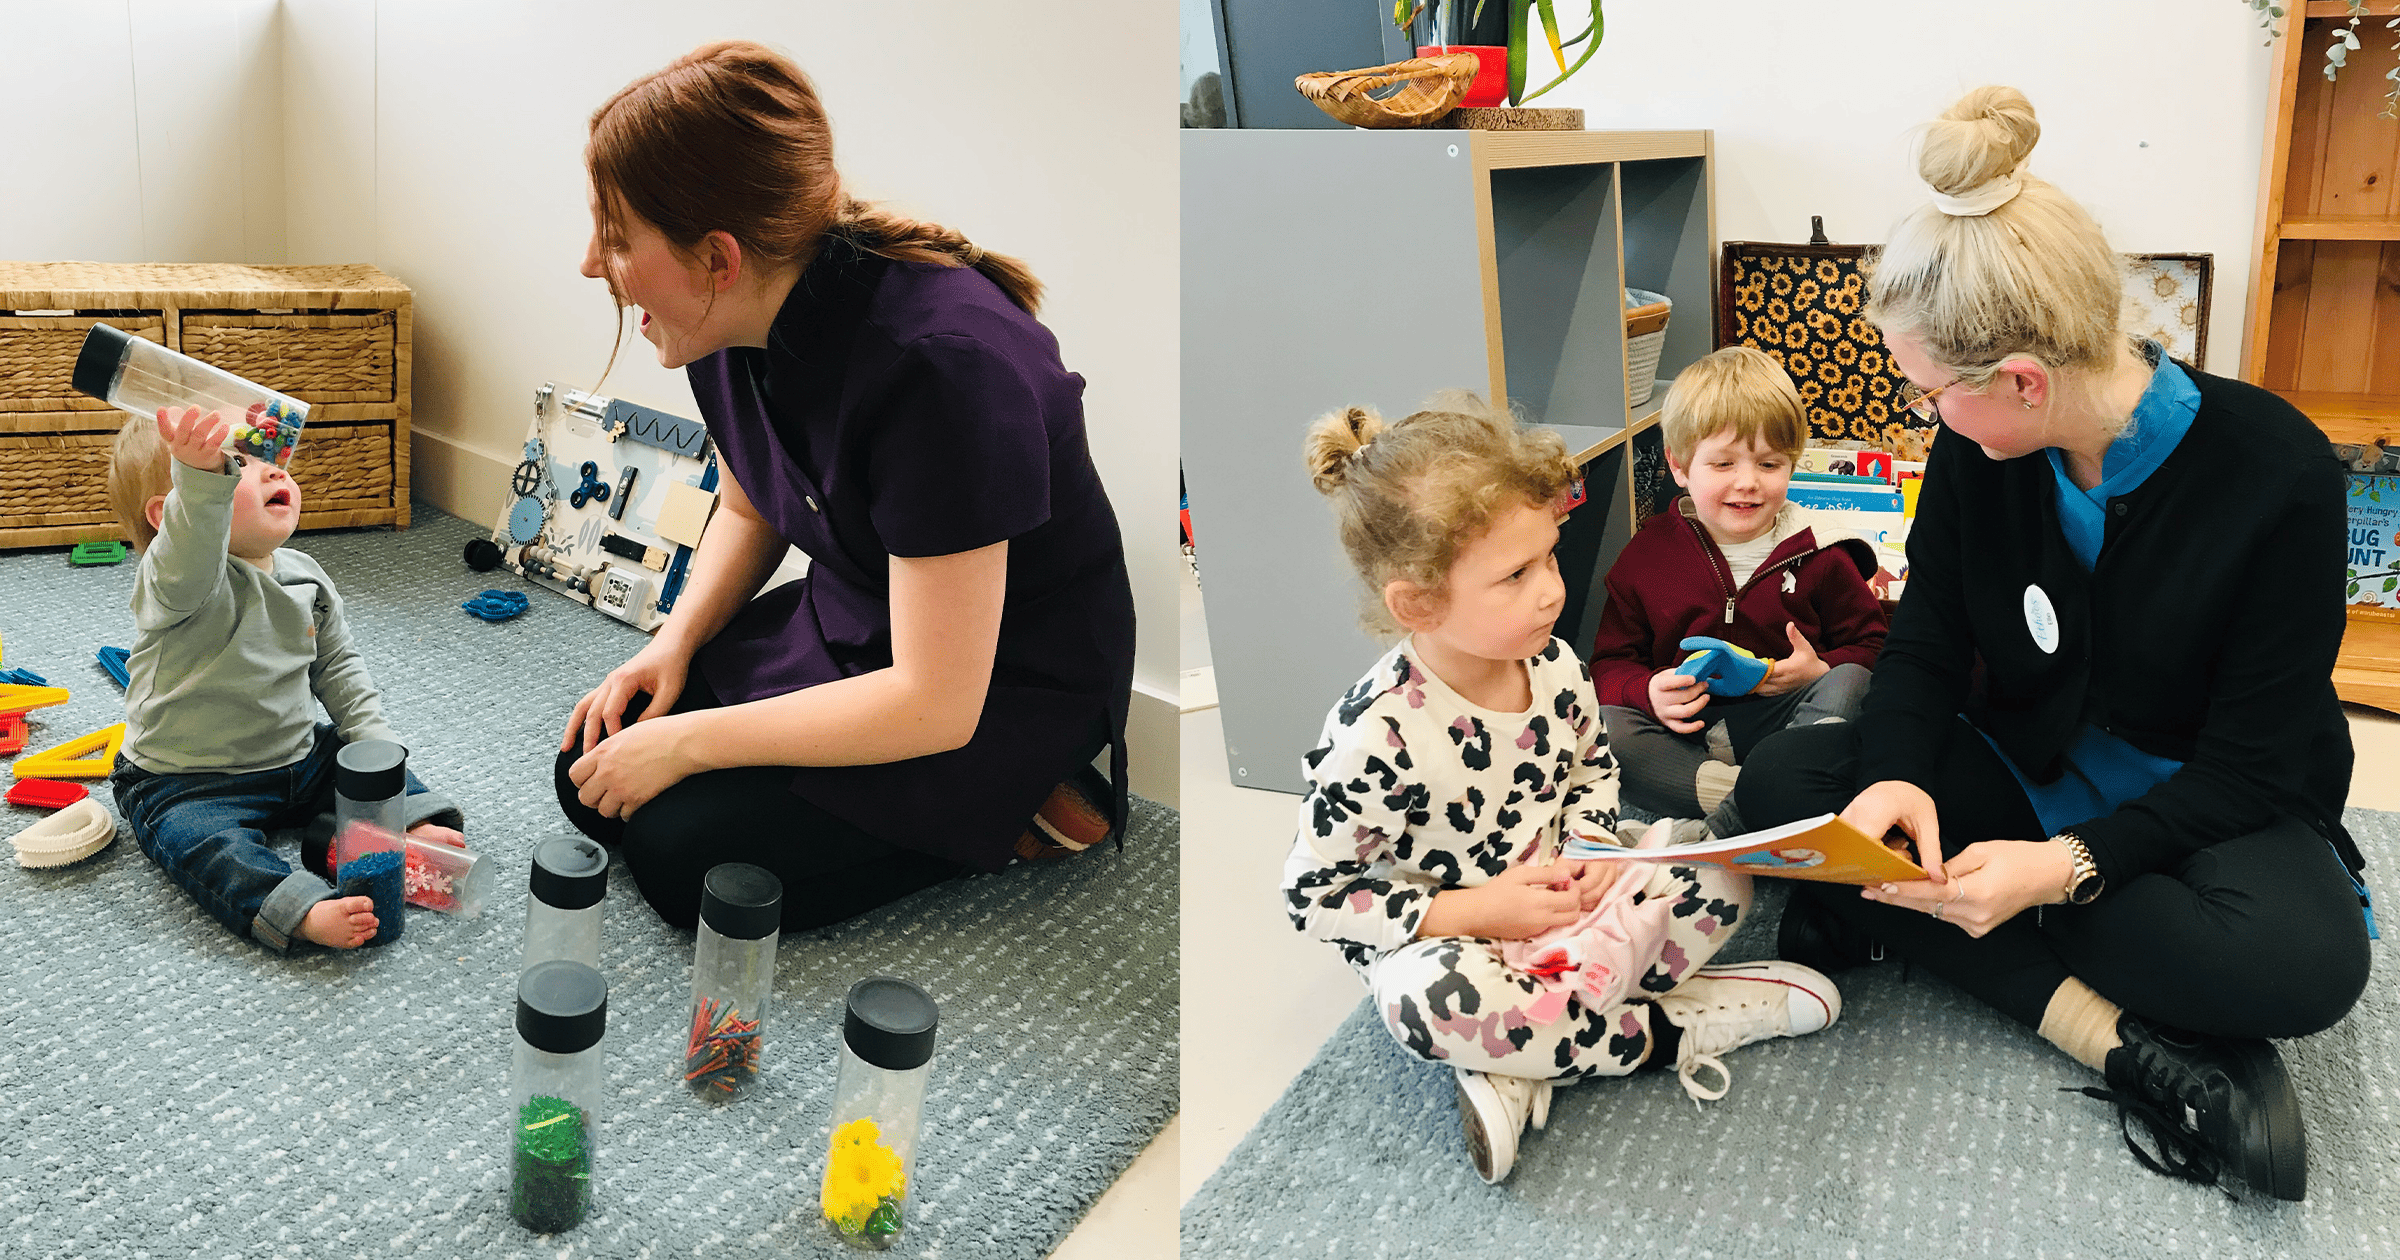 Two photos adjacent depicting two staff members from Echoes reading books and playing with toys with the children in their care